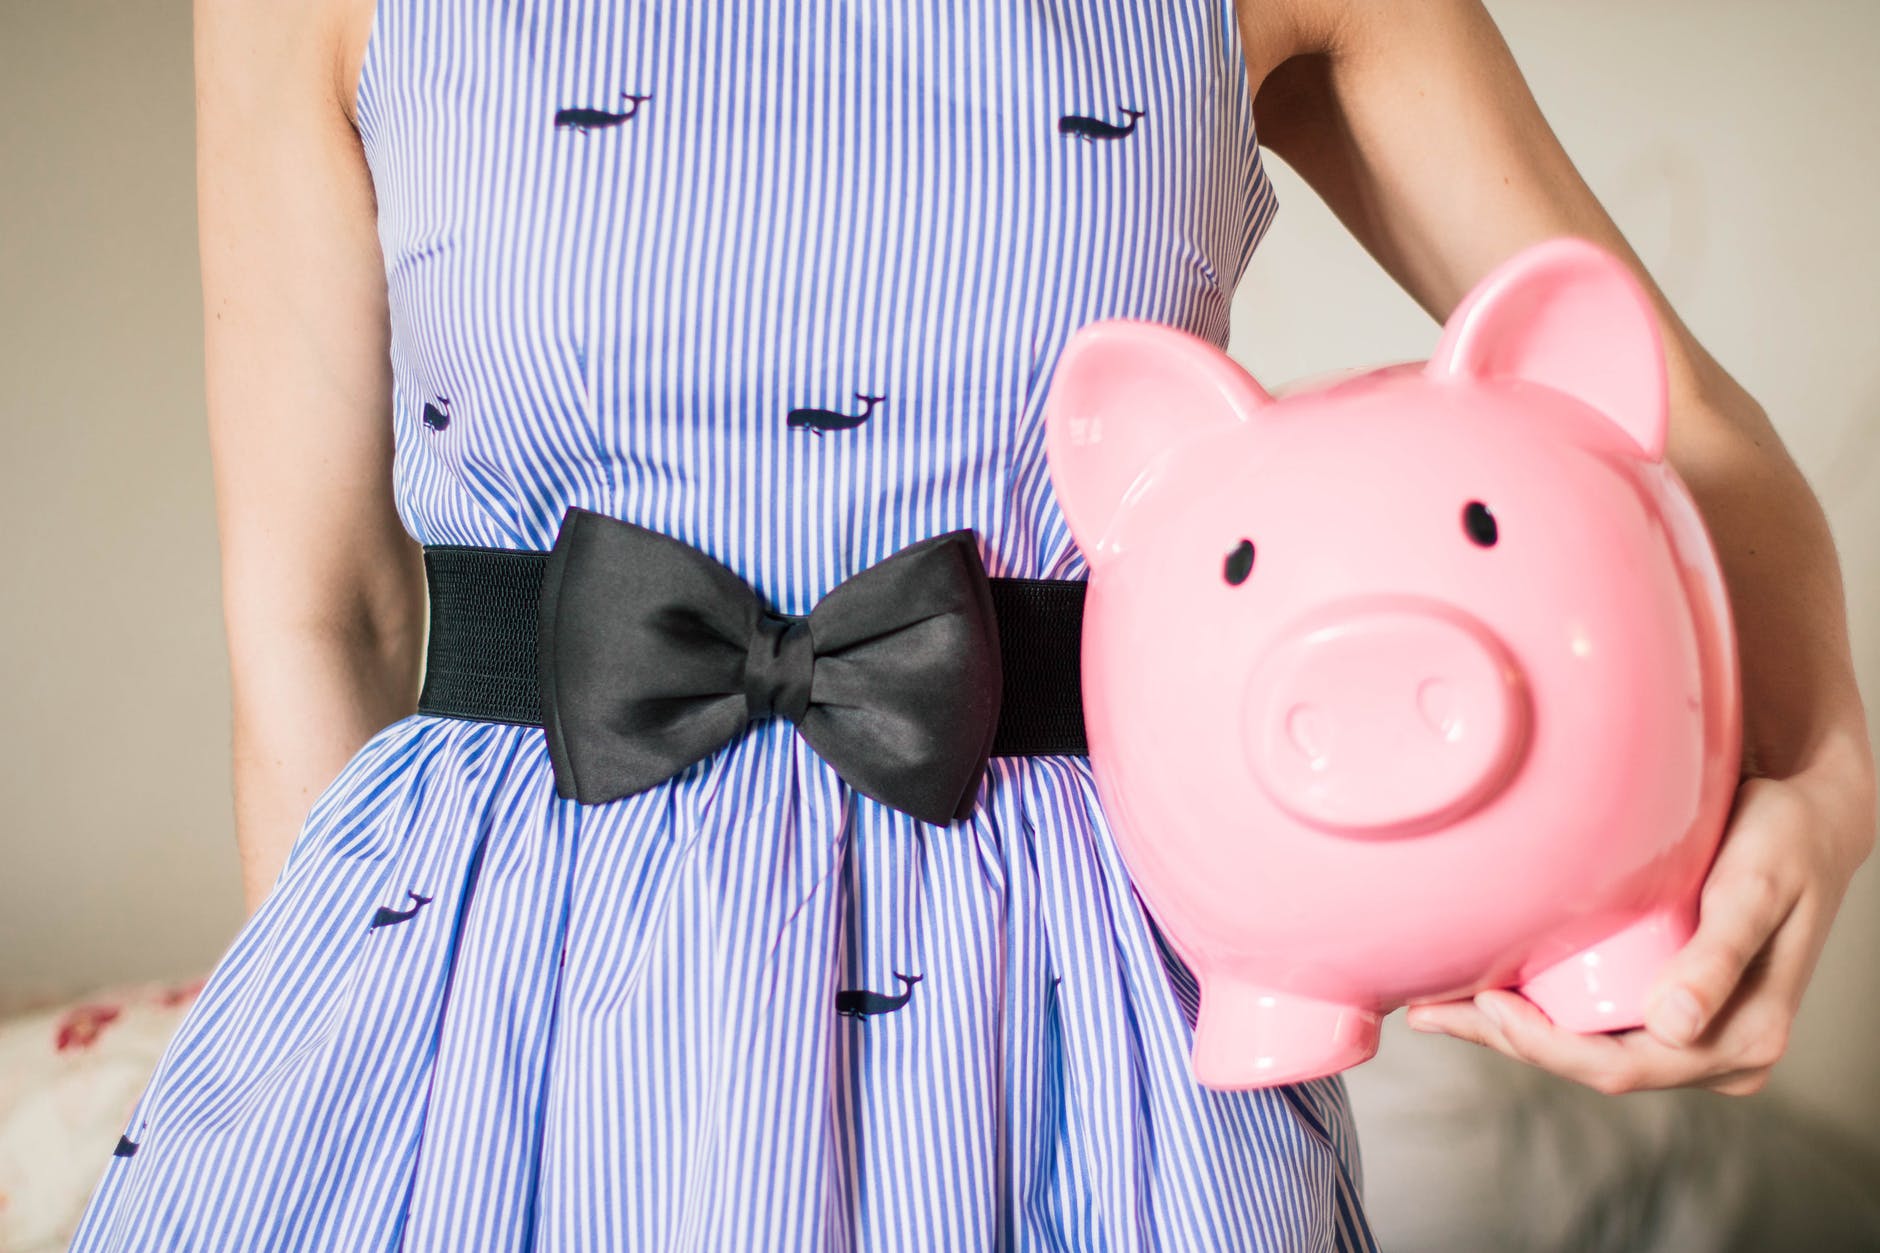 A woman in a blue dress holding a large piggy bank for saving money.